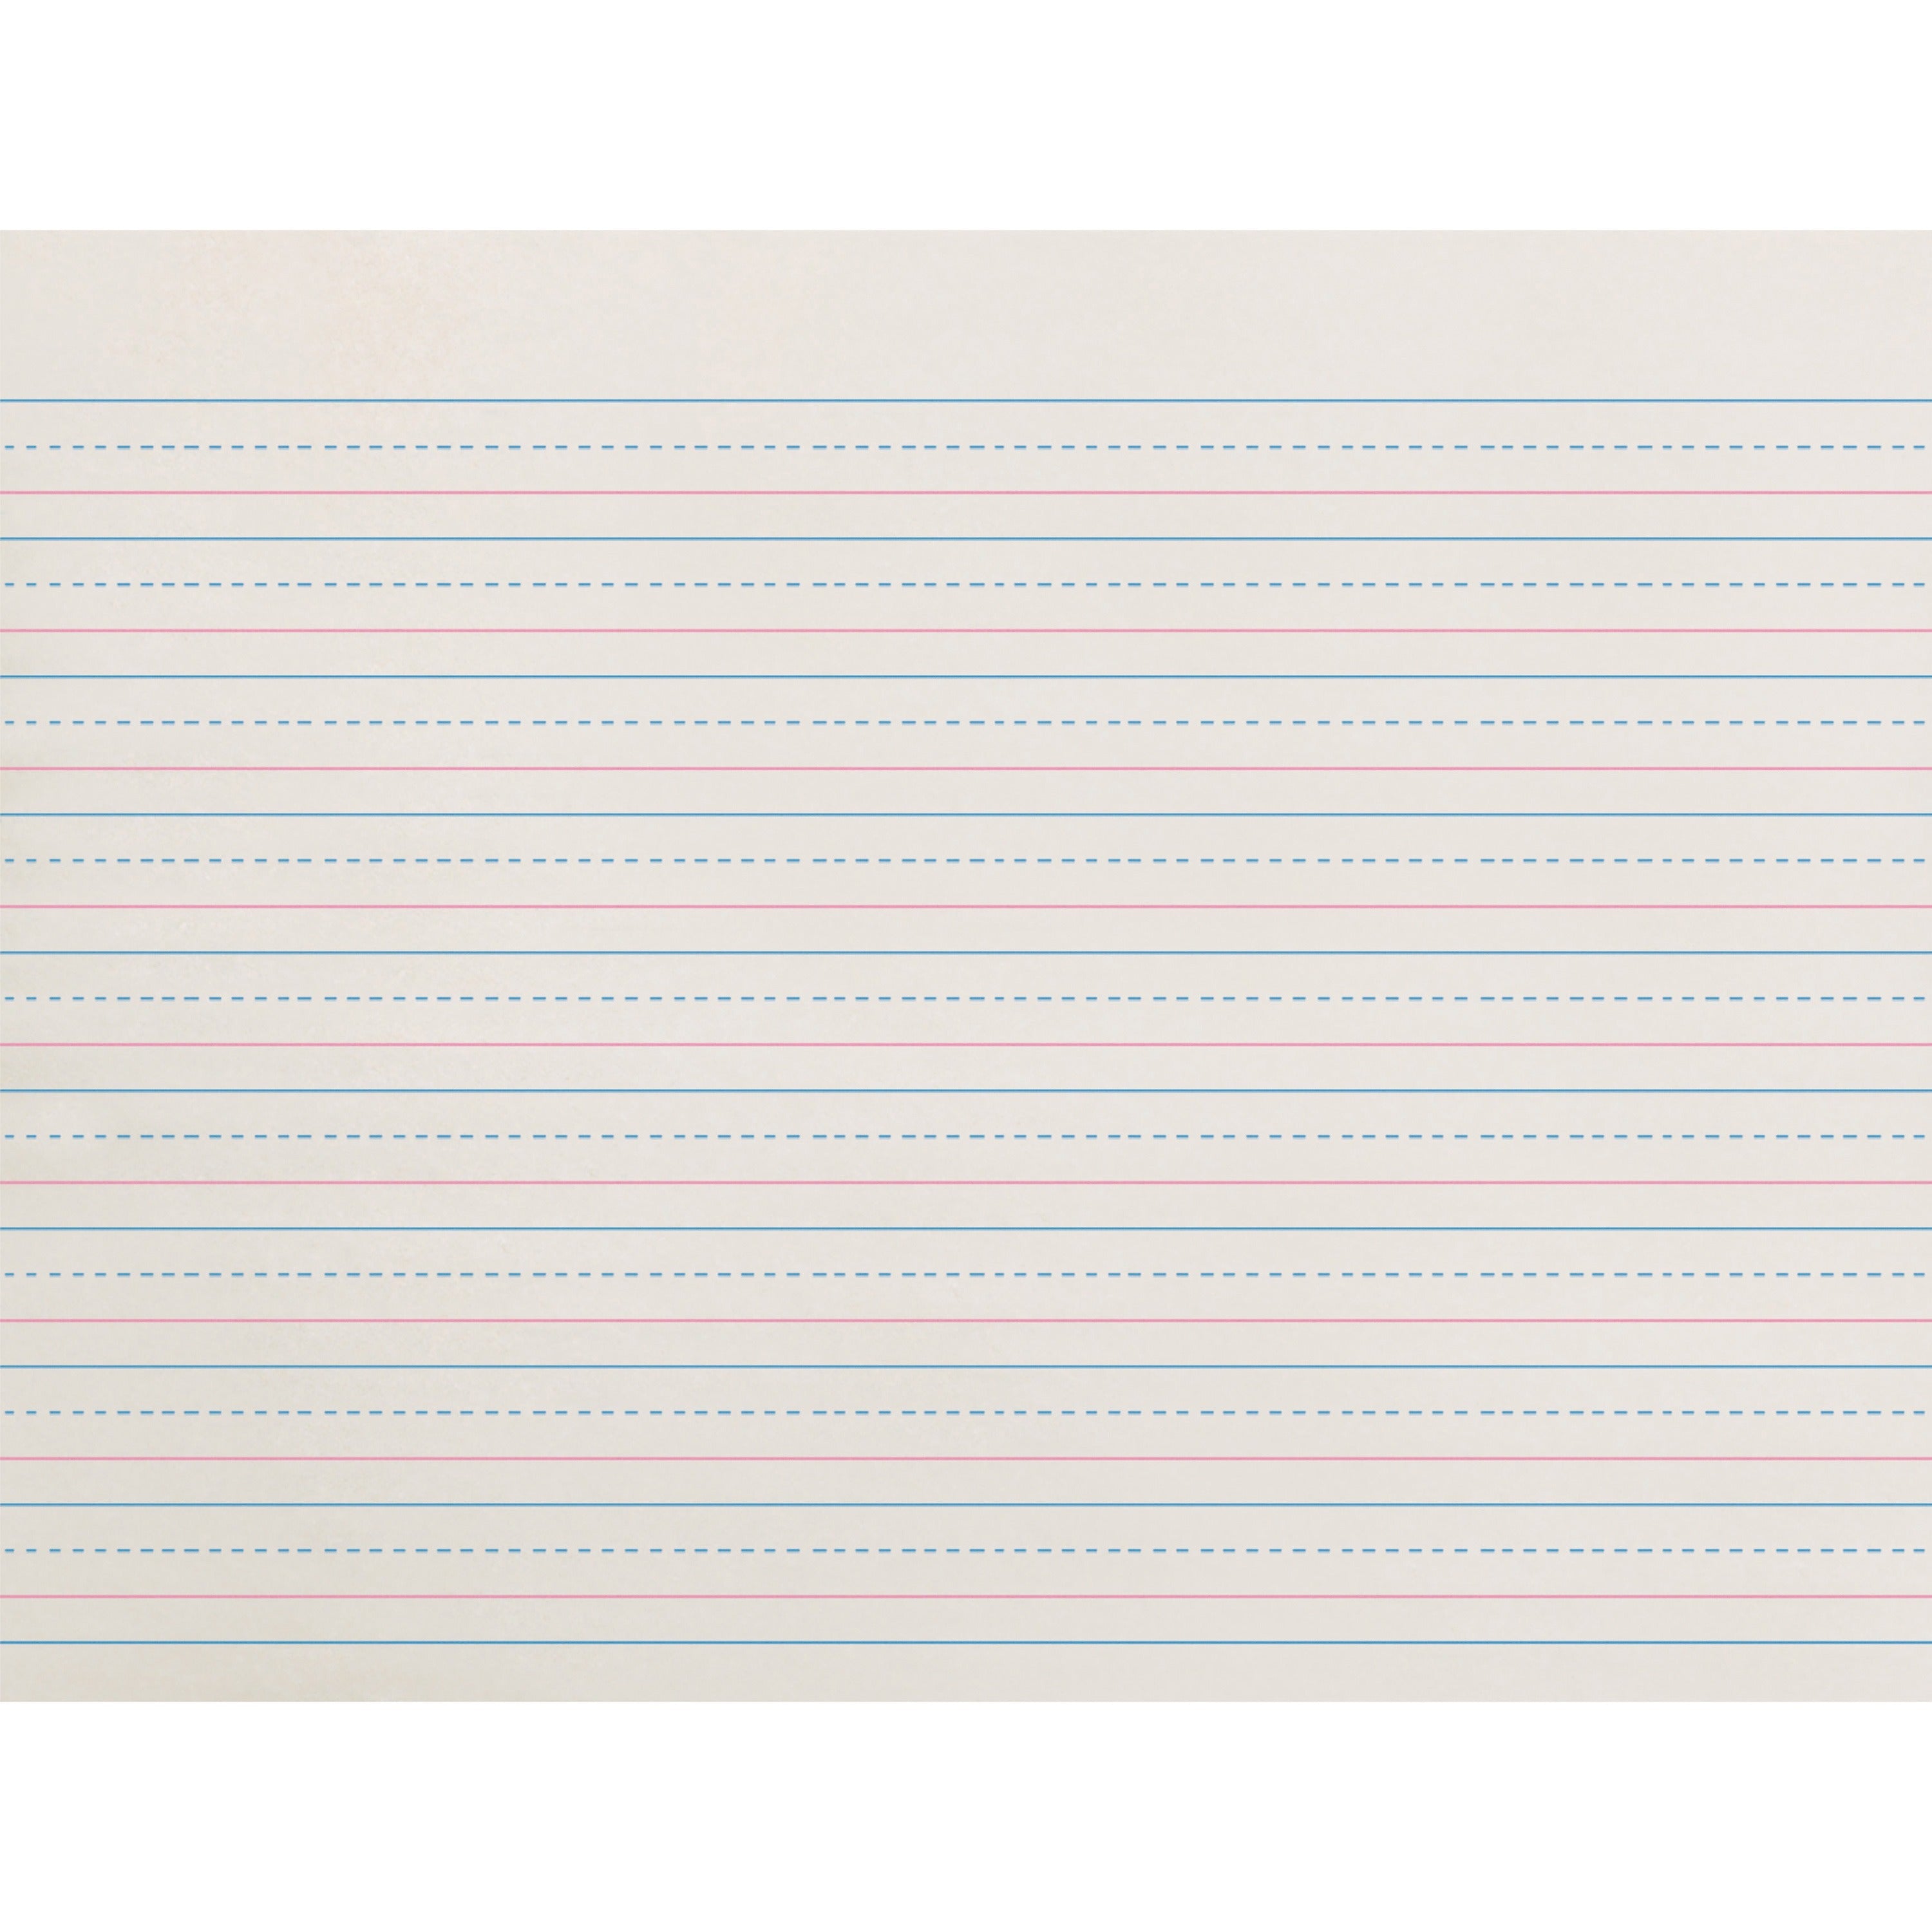 zaner-bloser-dotted-midline-newsprint-paper-500-sheets-050-ruled-unruled-margin-10-1-2-x-8-white-paper-500-pack_paczp2612 - 1